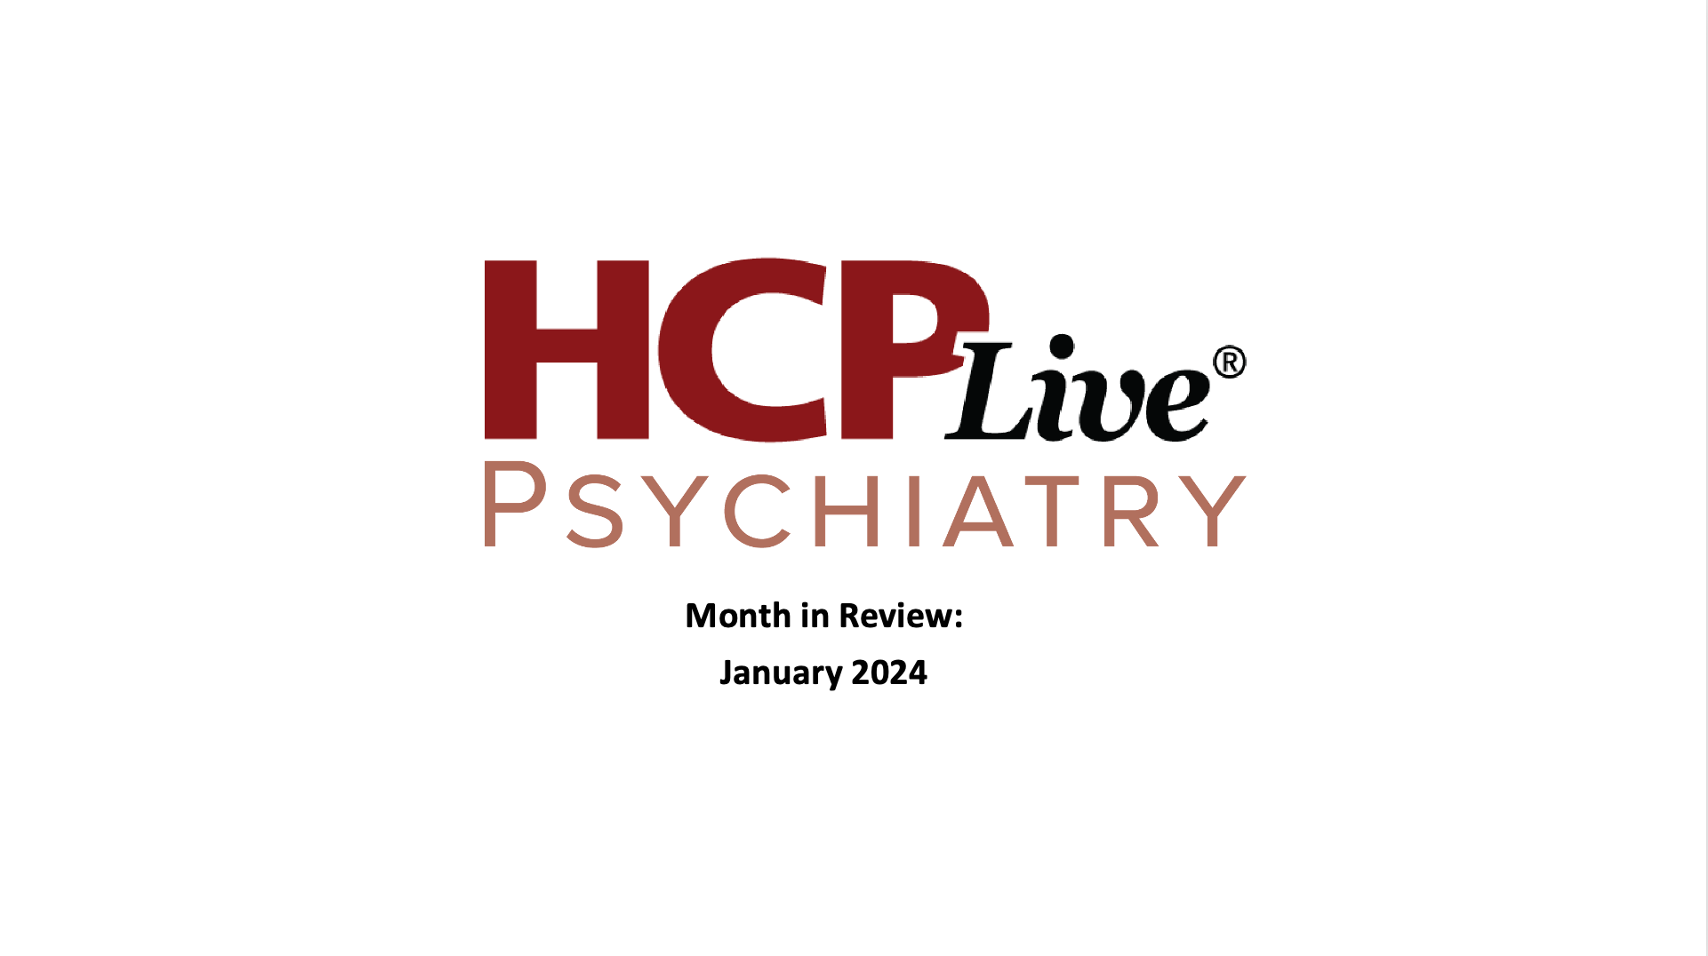 Psychiatry Month in Review: January 2024